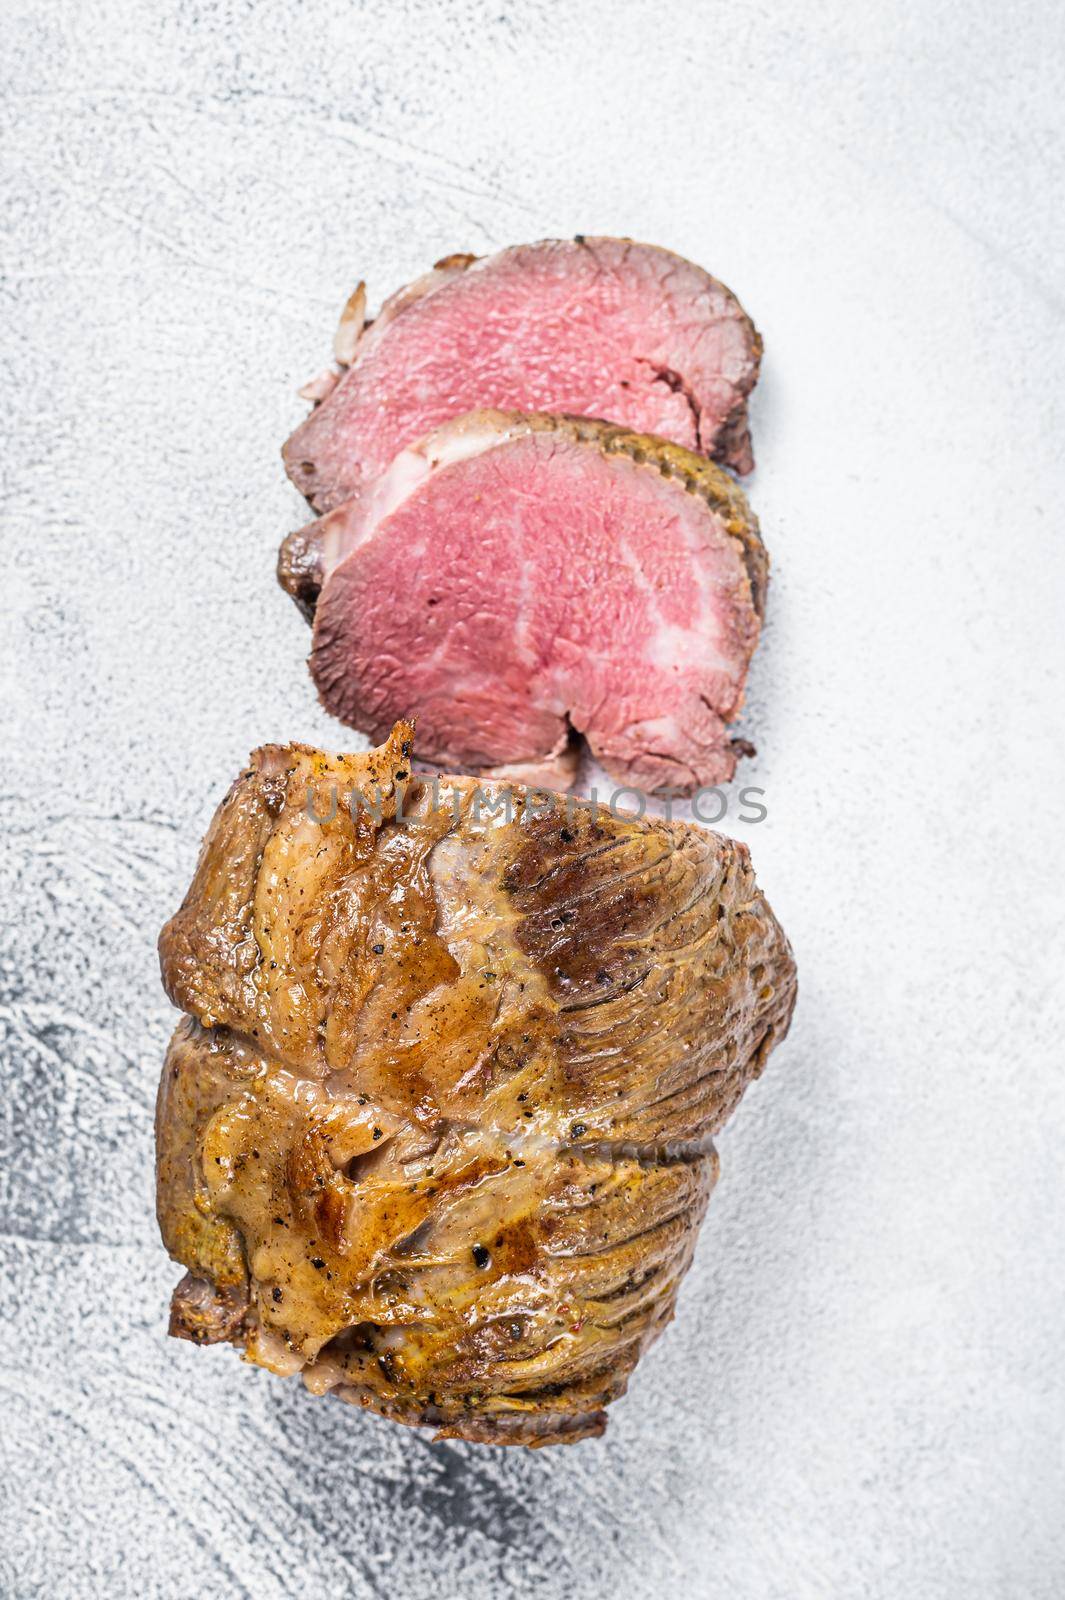 Roast beef meat fillet on kitchen table. White background. Top view.